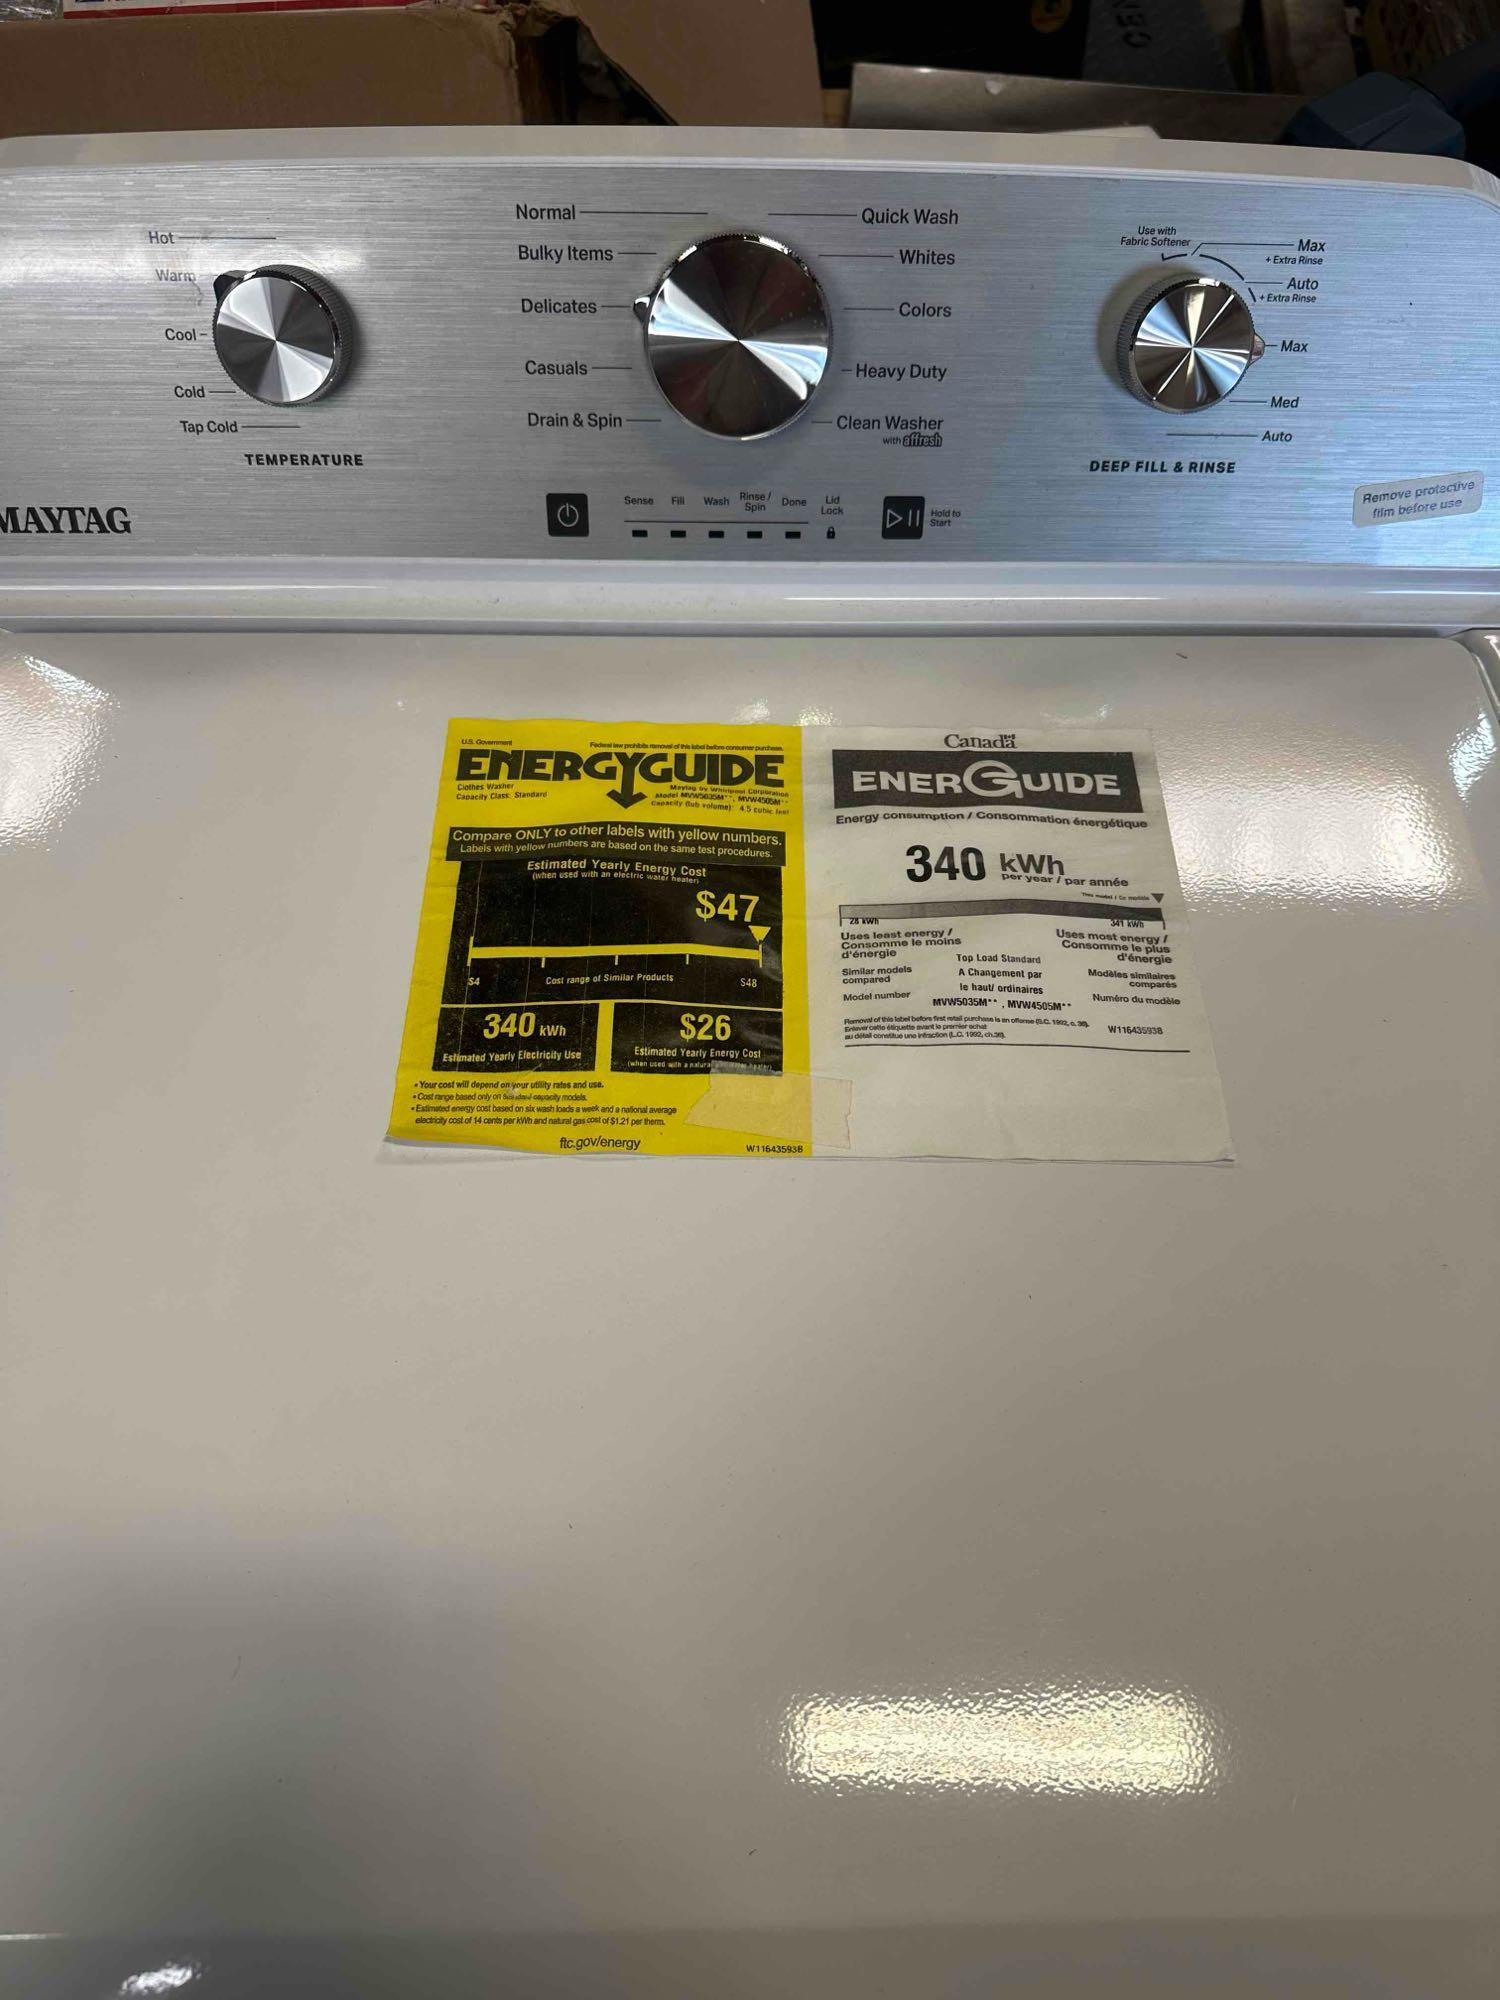 Maytag 4.5 cu. ft. Top Load Washer in White